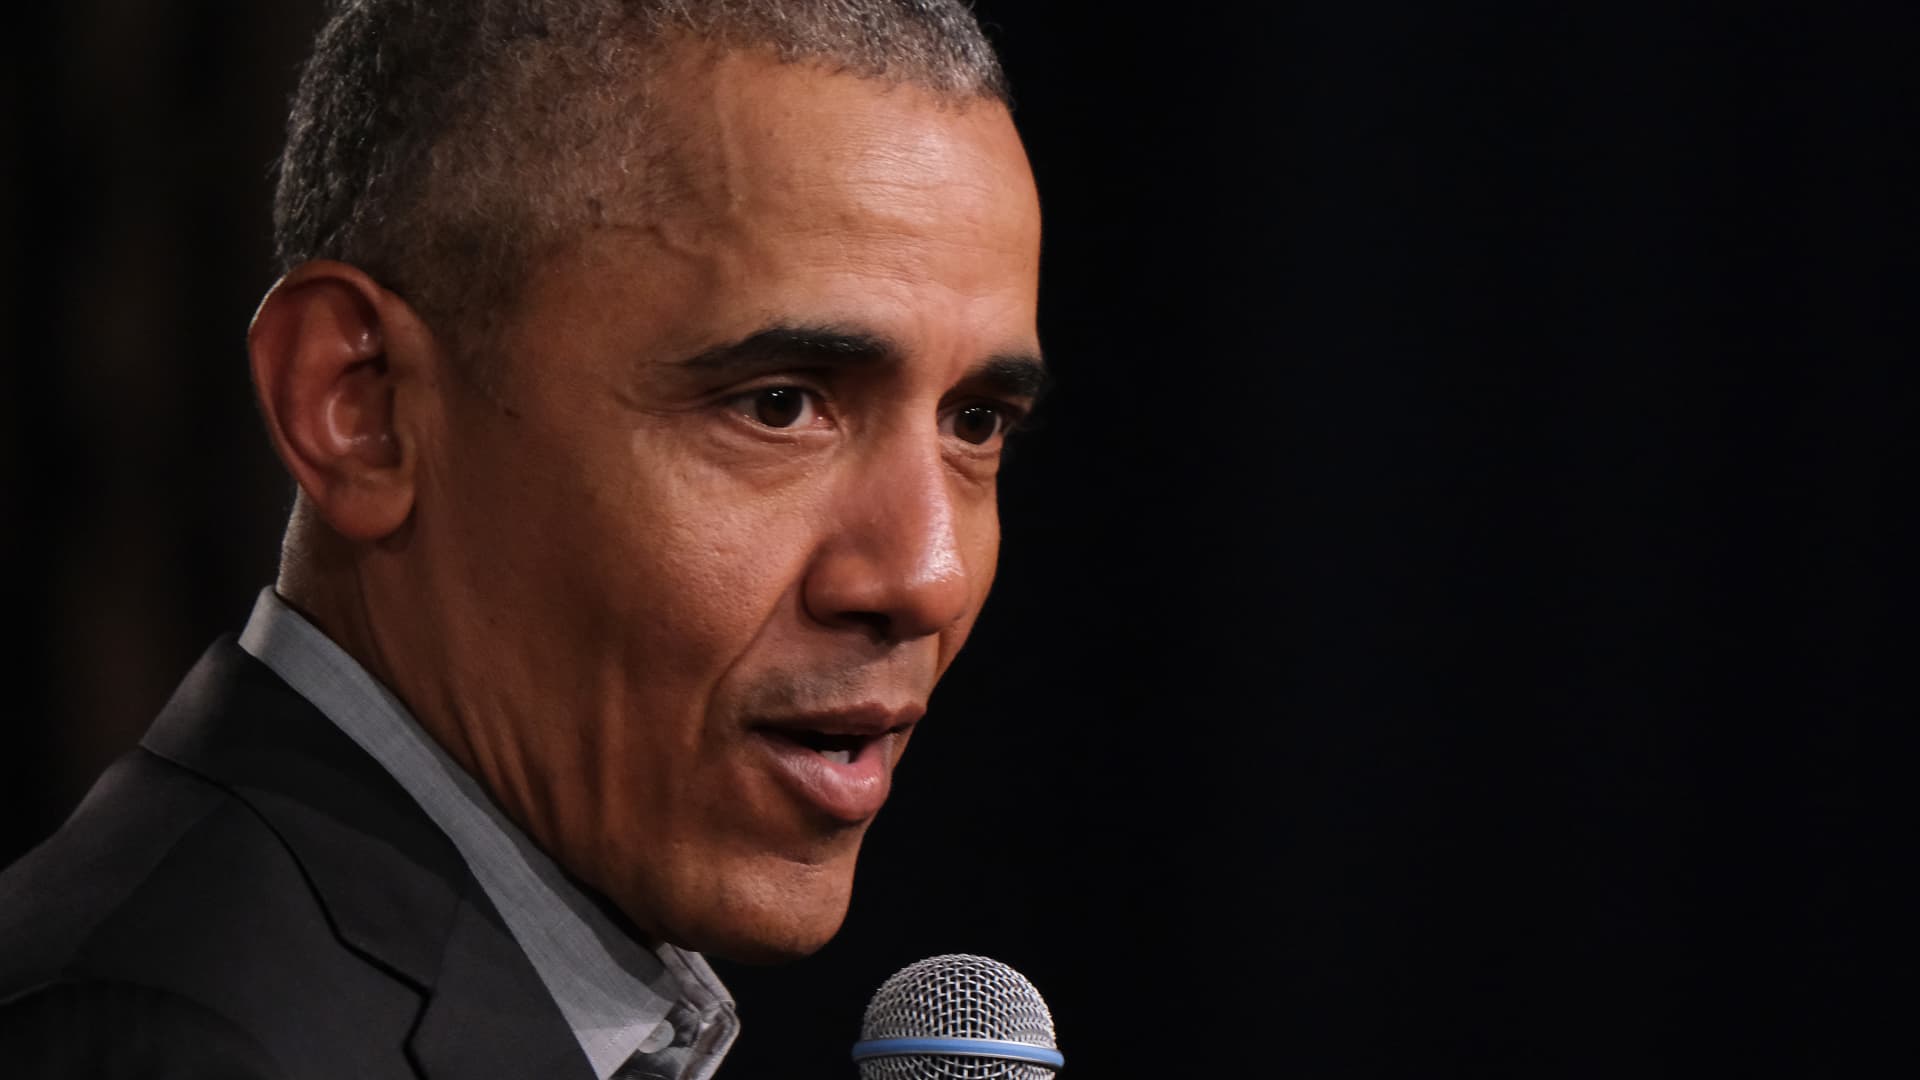 Barack Obama: This is what you can do to reform the system that leads to police brutality